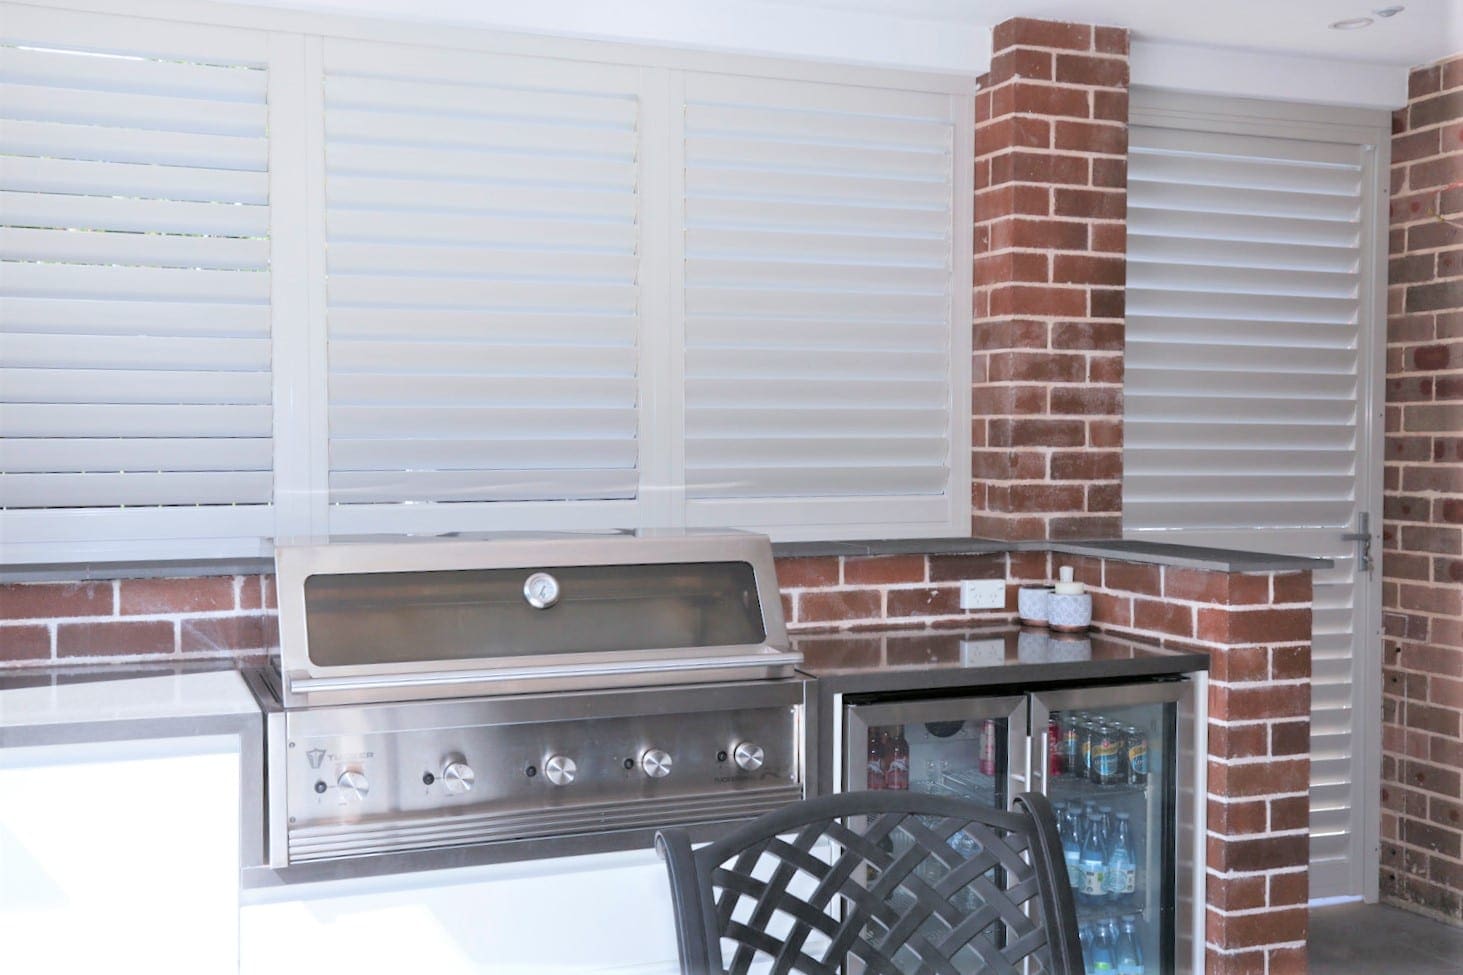 Outdoor Blind or Awning - Fusion Shutters and Blinds